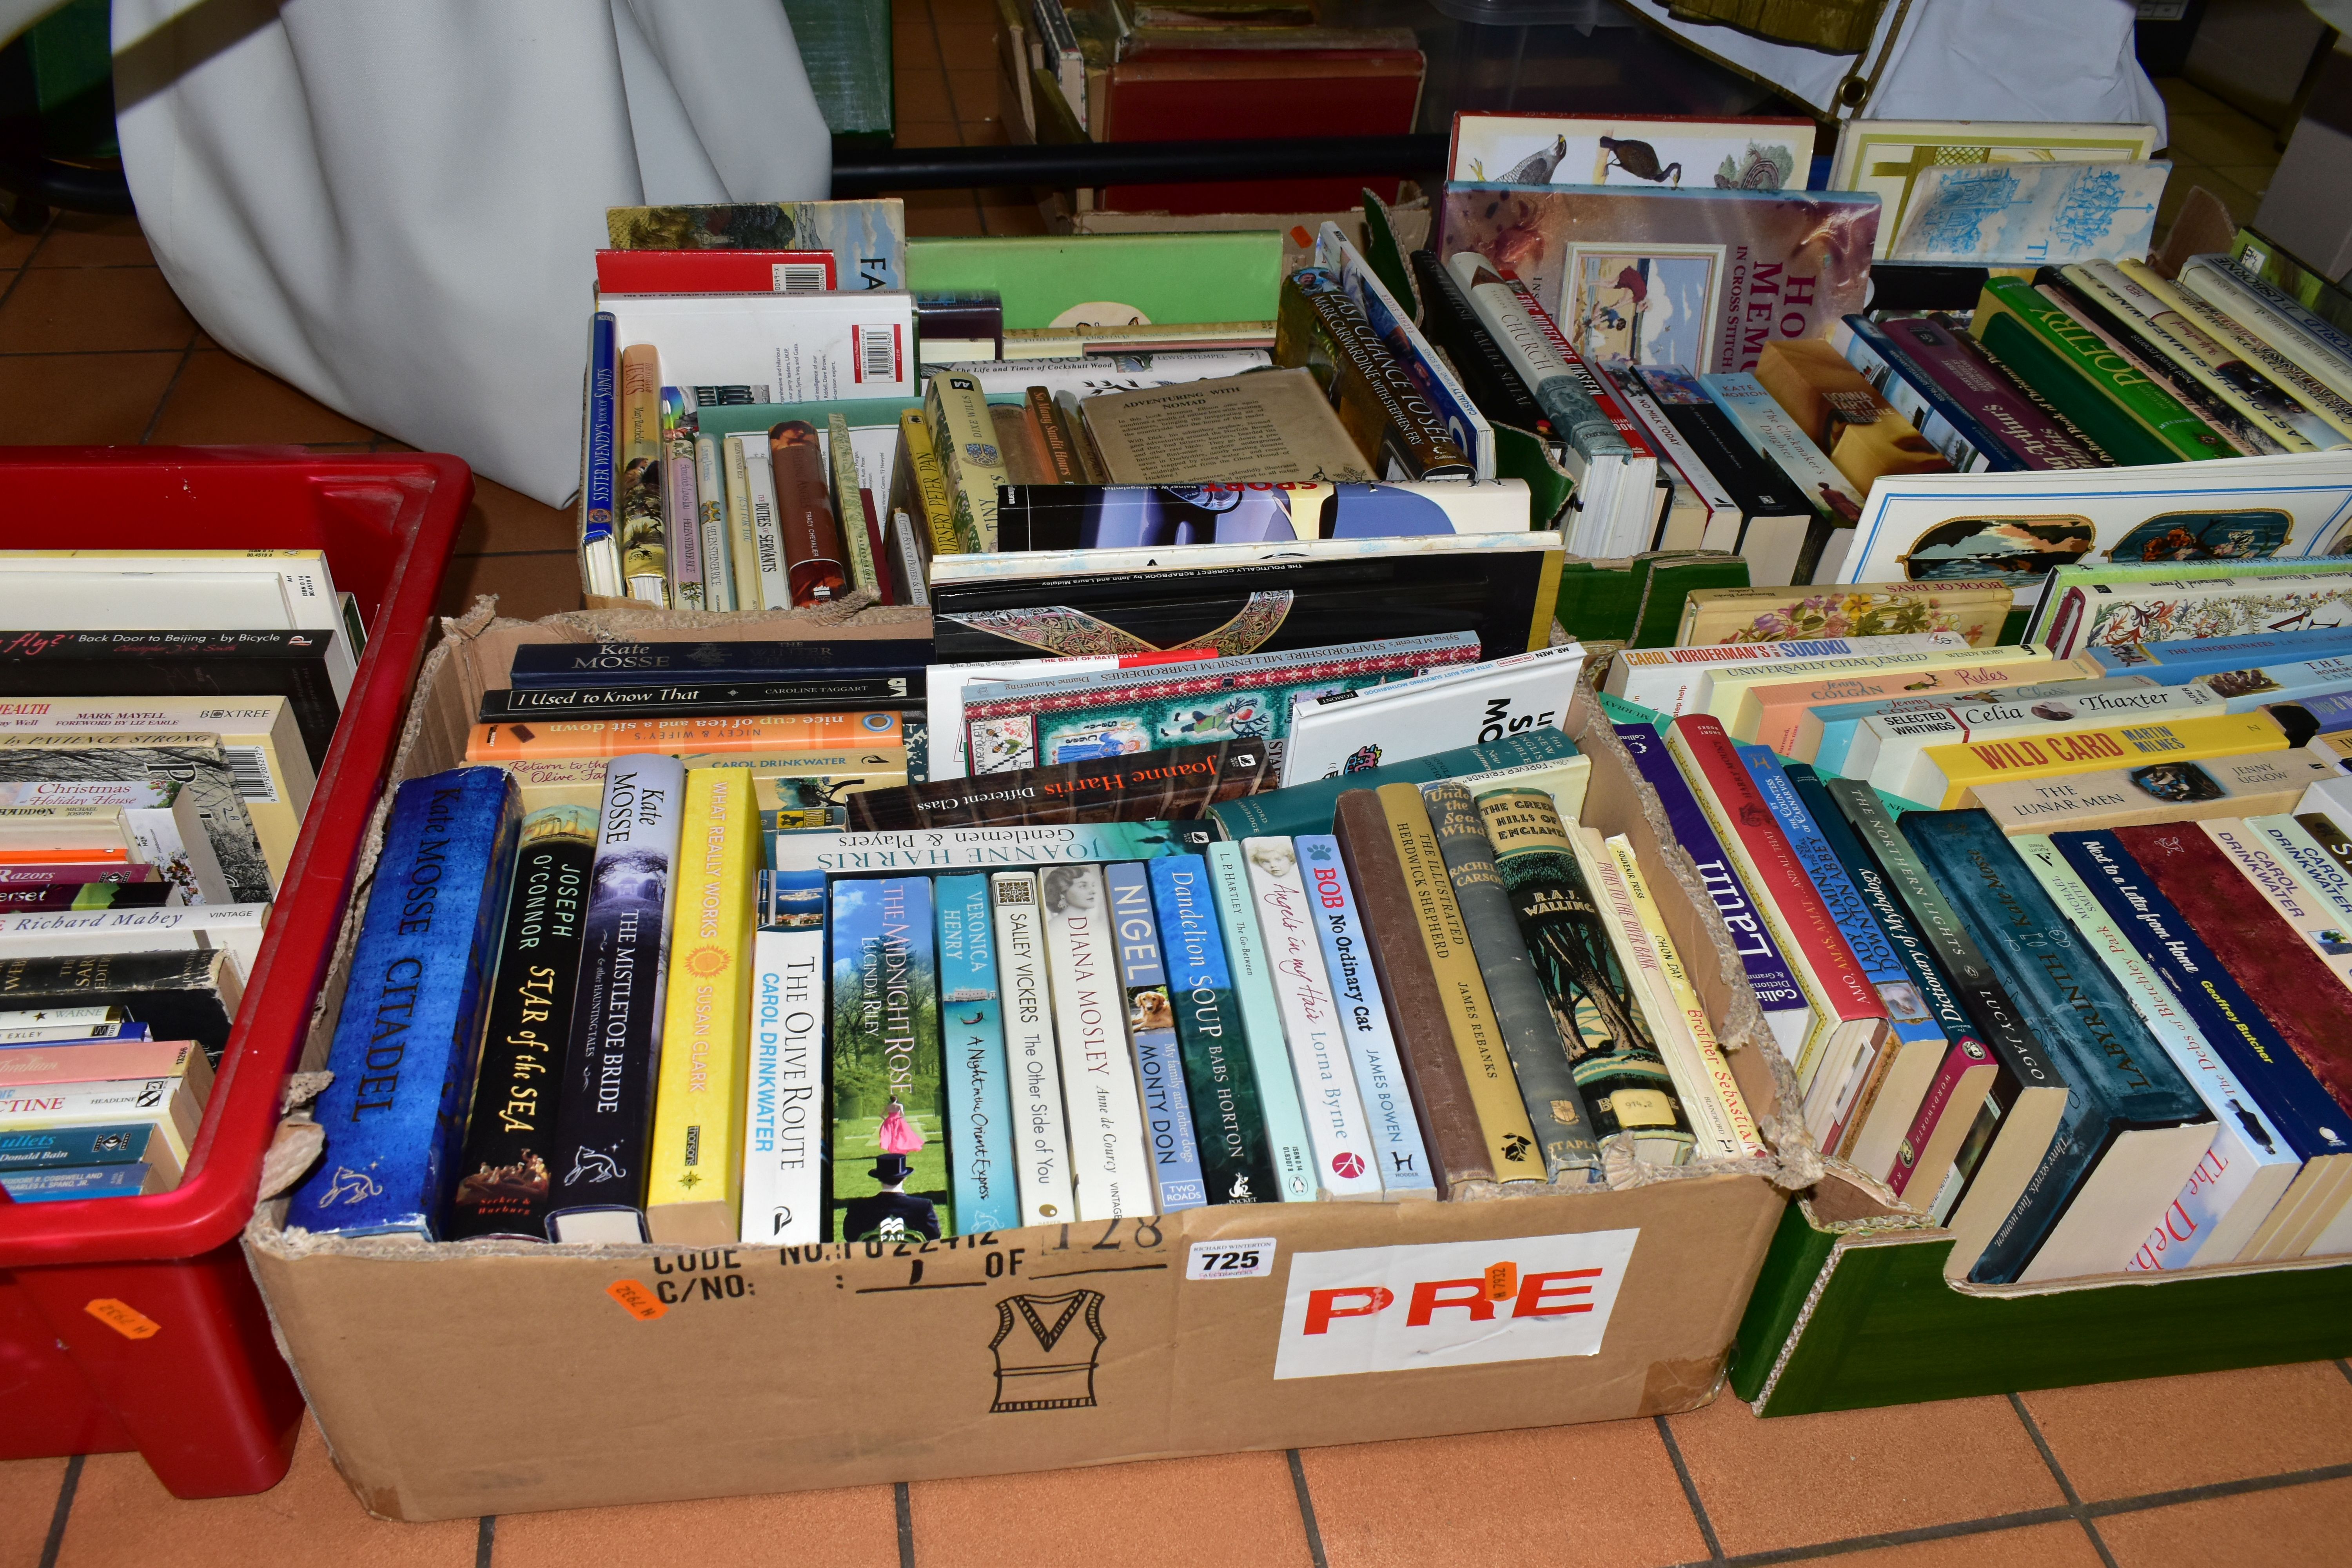 BOOKS, five boxes containing approximately 160 miscellaneous titles in hardback and paperback